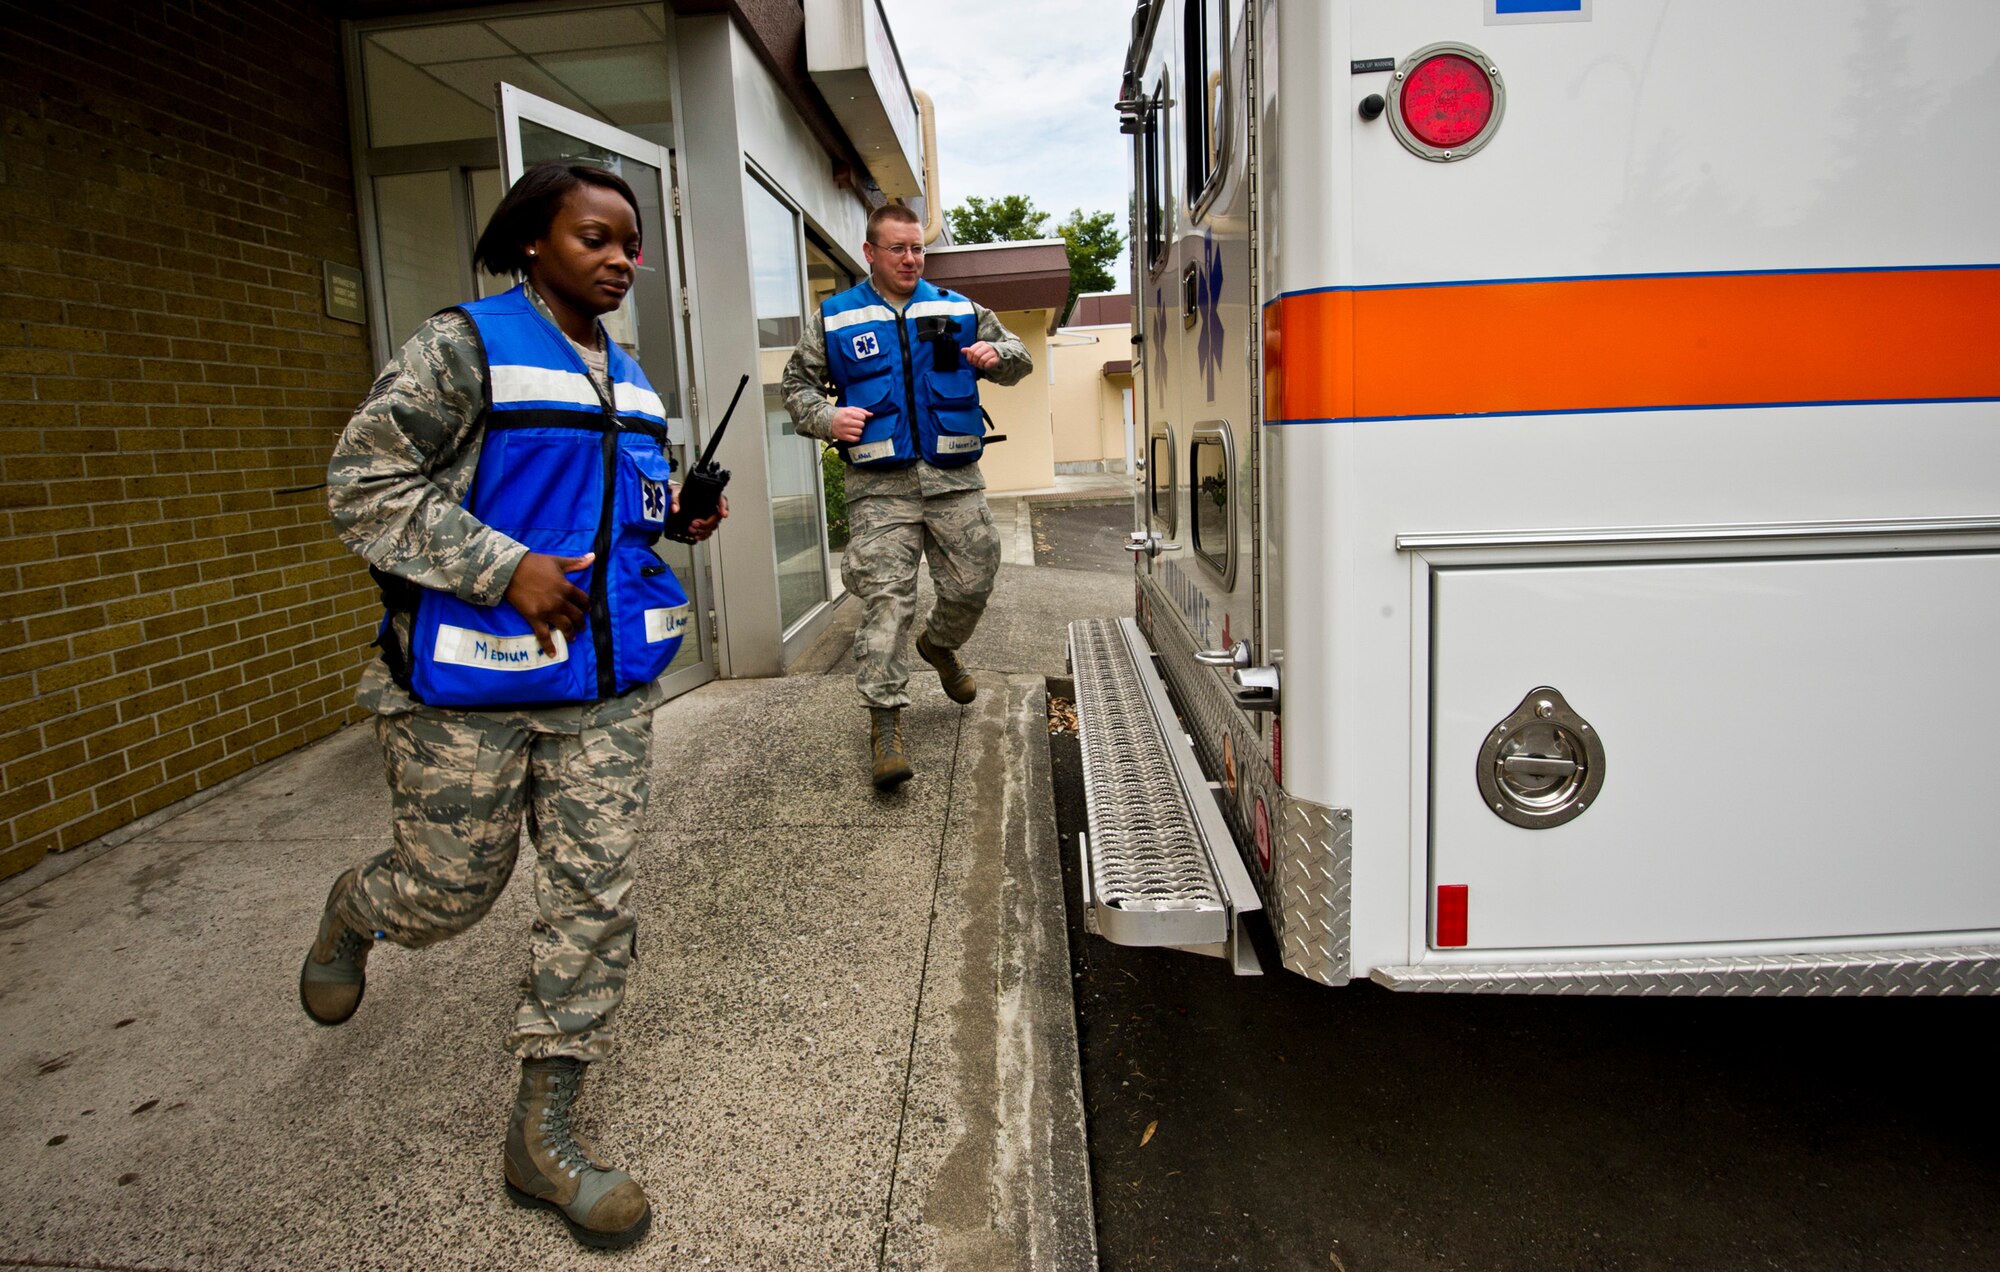 Staff Sgt. Raven Taylor (left) and Senior Airman Taylor Kanka, 374th Medical Operations Squadron medical technicians, race to an ambulance during a simulated 911 call to the Urgent Care Center at Yokota Air Base, Japan, July 8, 2011. Through the Stripes for Exceptional Performers (STEP), Taylor was awarded the rank of technical sergeant for her impact on the Air Force during her career. She was selected alongside only seven other Airmen in Air Combat Command to be STEP promoted at the end of the year. (U.S. Air Force photo/Staff Sgt. Samuel Morse)